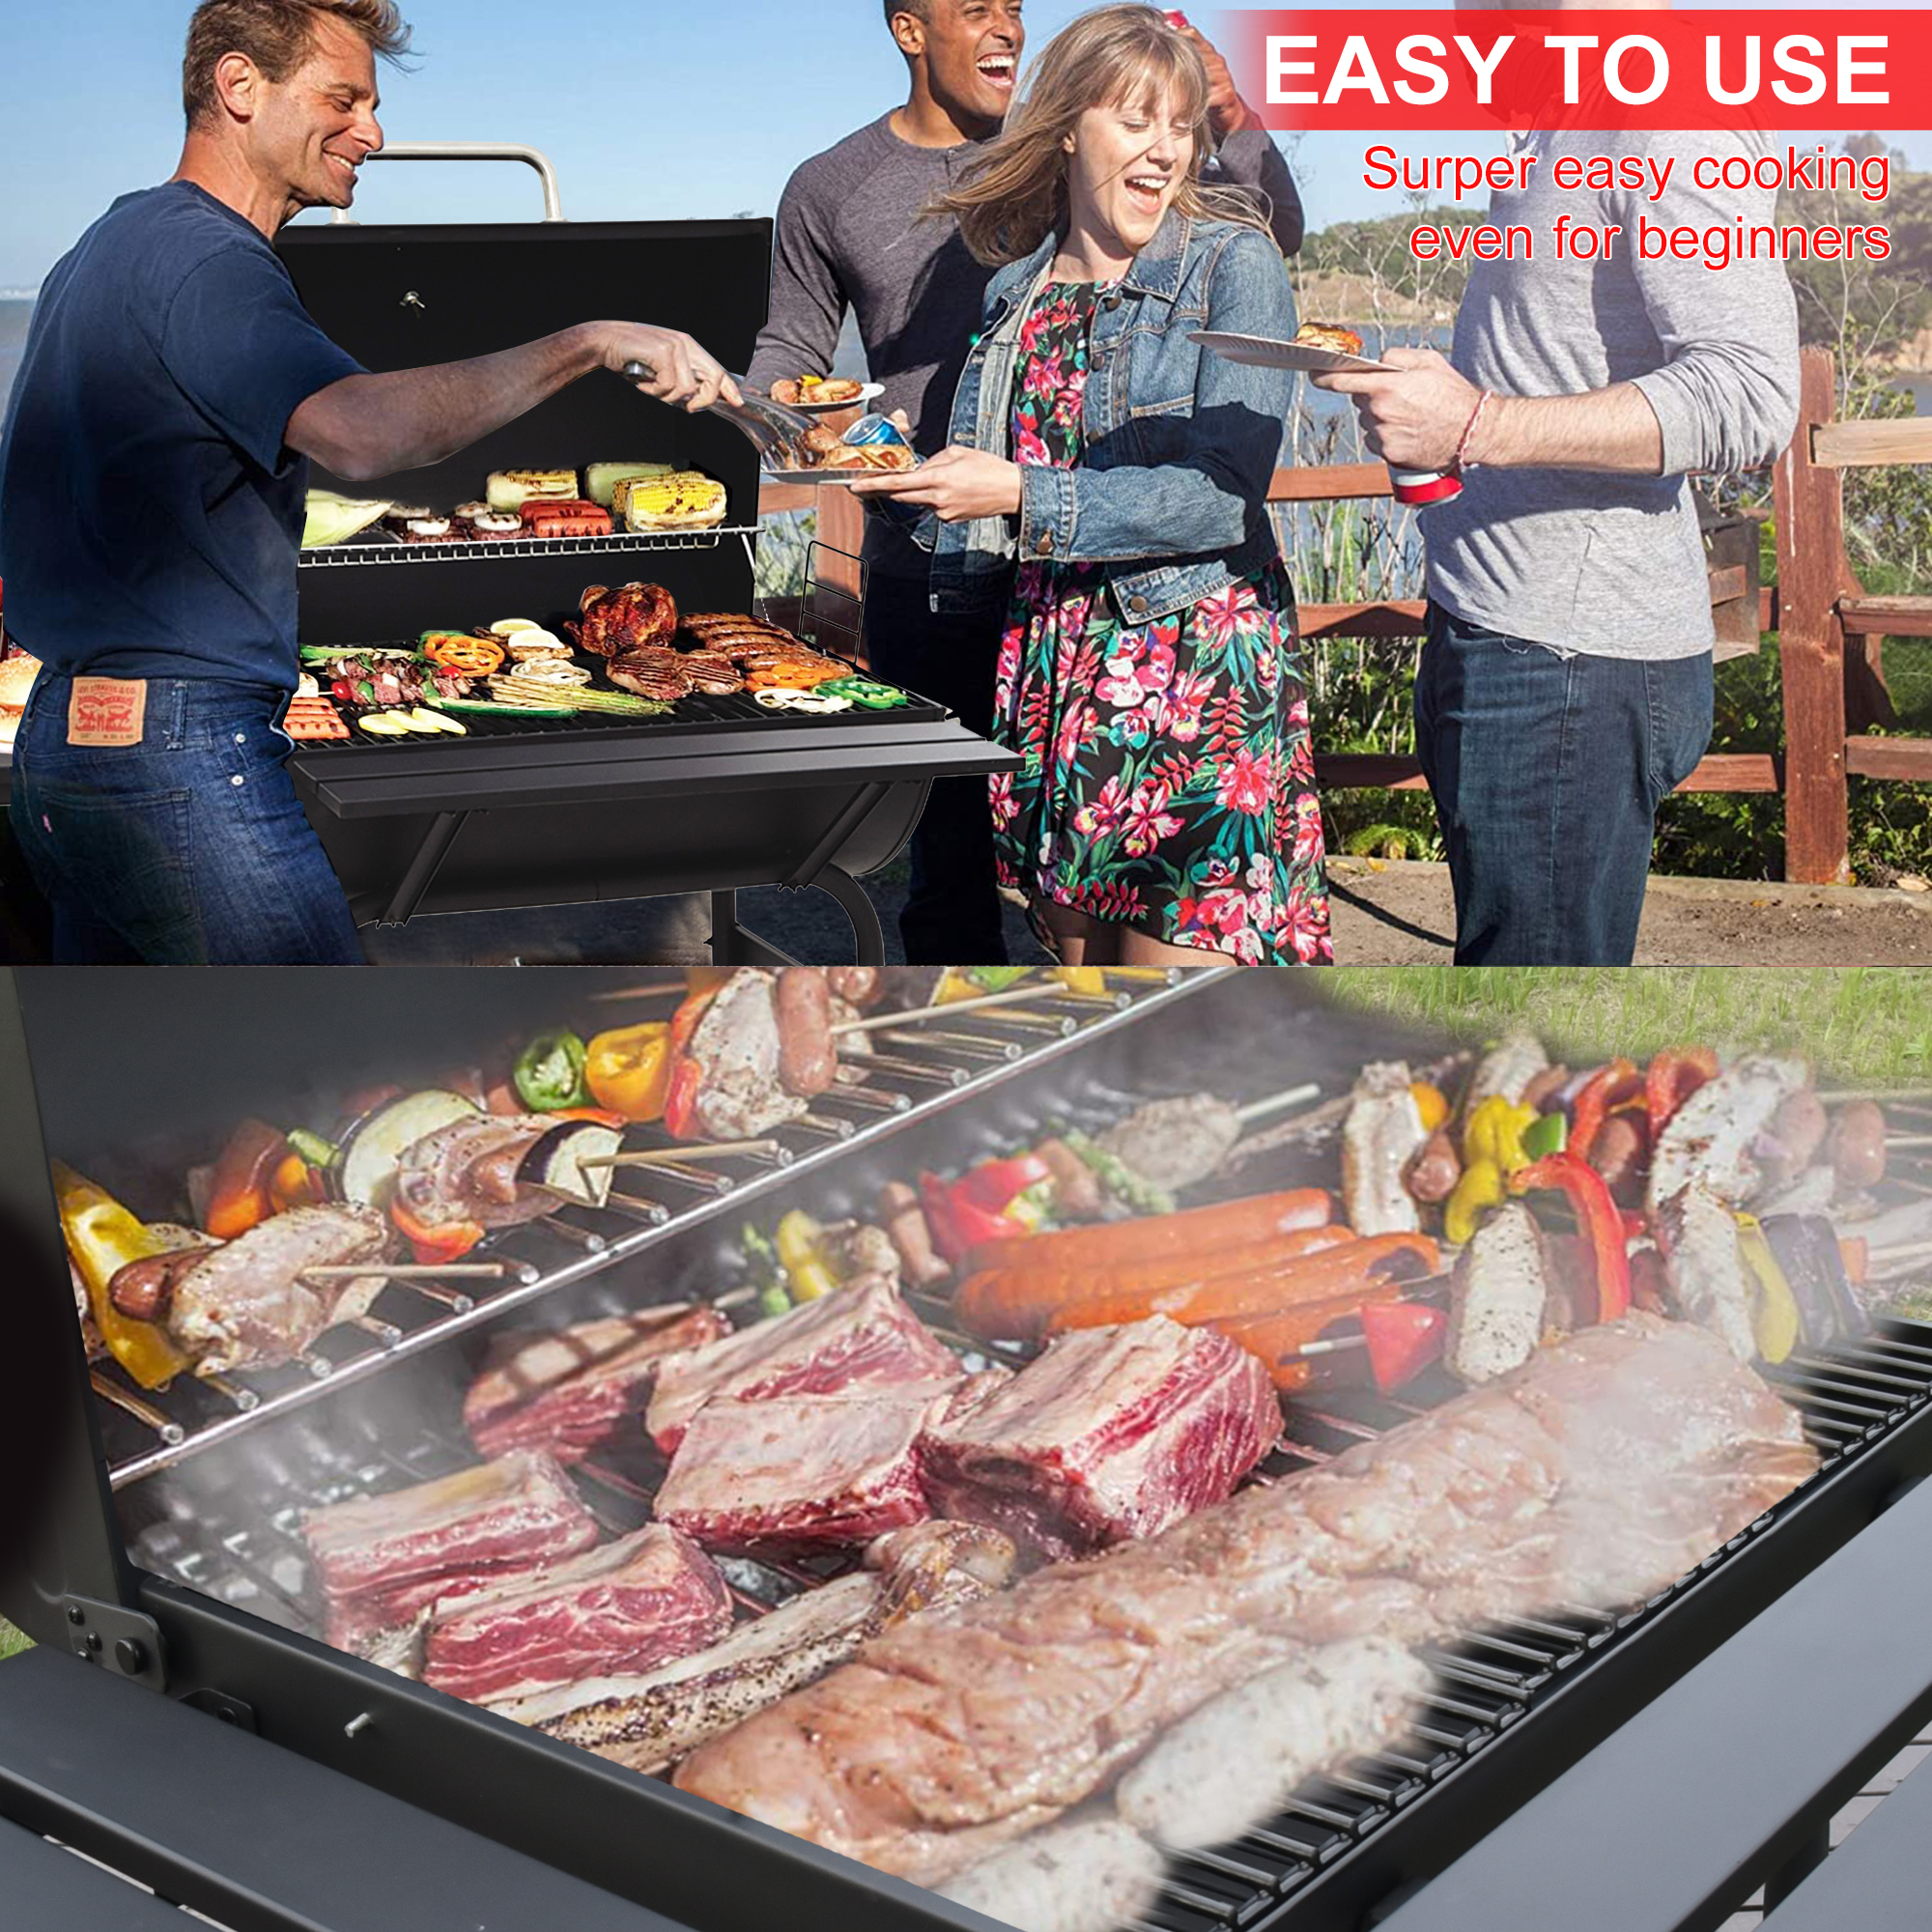 Patio Outdoor Charcoal Grill for Patio, 30'' Portable BBQ Charcoal Grill with Metal Shelf, BBQ Charcoal Grill w/Temperature Gauge and Metal Grate, Cooking Grate for Steak Chicken, SS1062 - image 4 of 8